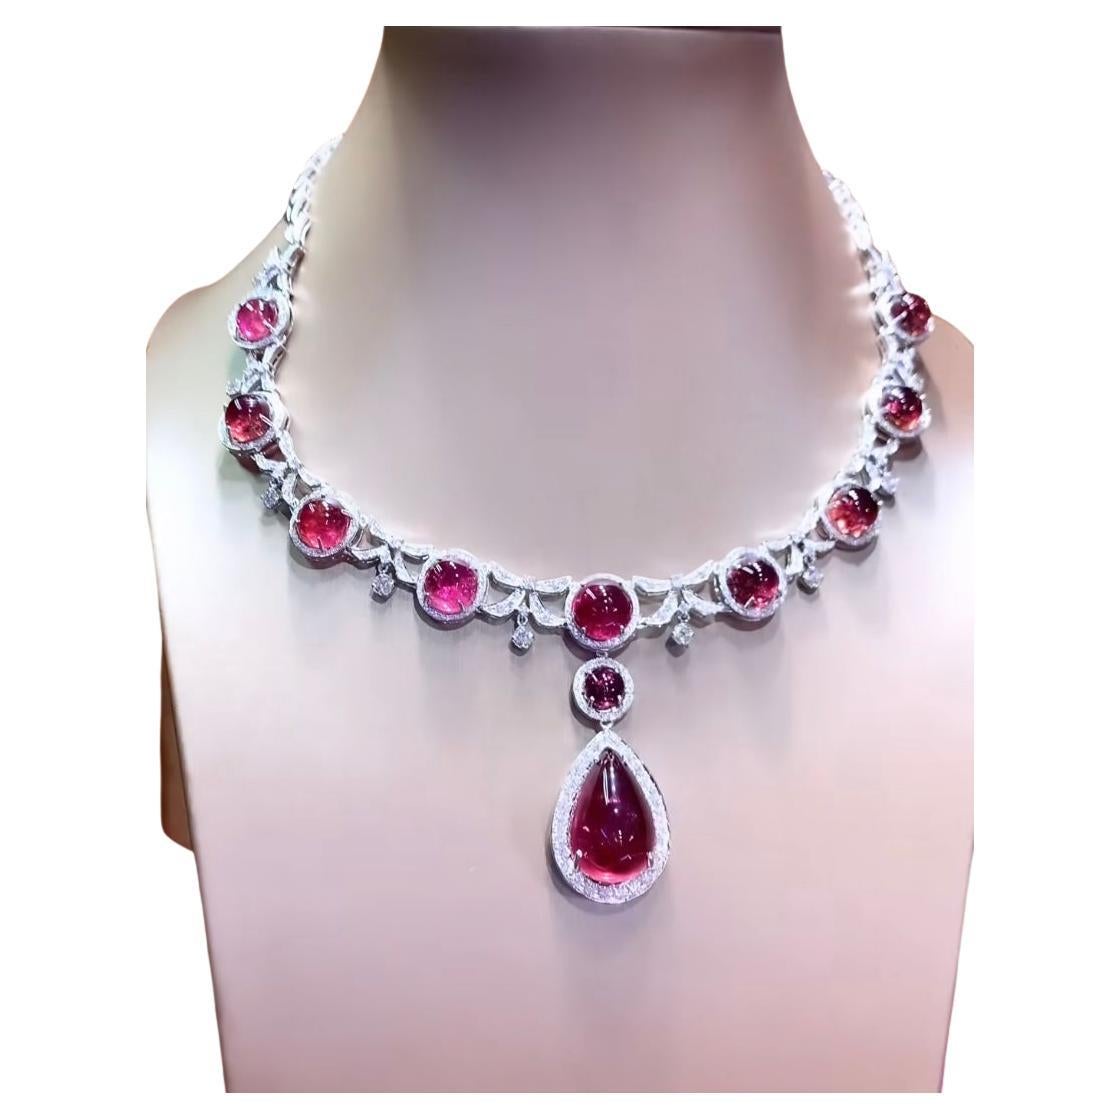 Splendid Rubellite Tourmalines and Diamonds necklace,  extremely hard to collect a set of rubellite tourmaline like this. So perfect matched, too stunning, too satisfying .
Wearing jewels can make a person feel confident, elegant and stylish. They